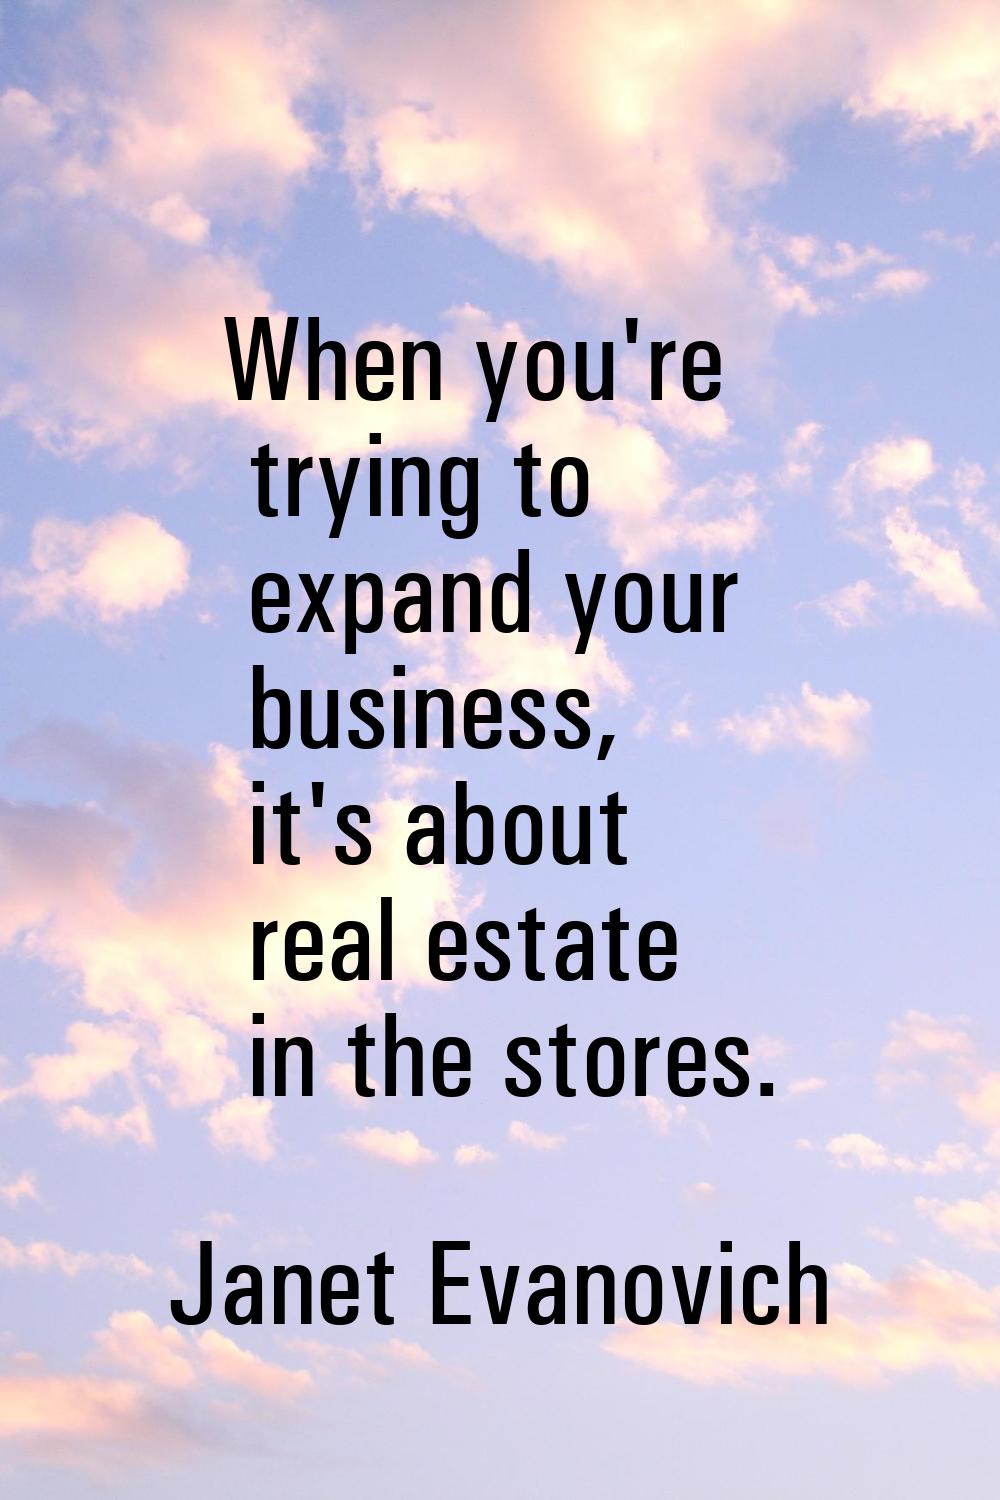 When you're trying to expand your business, it's about real estate in the stores.